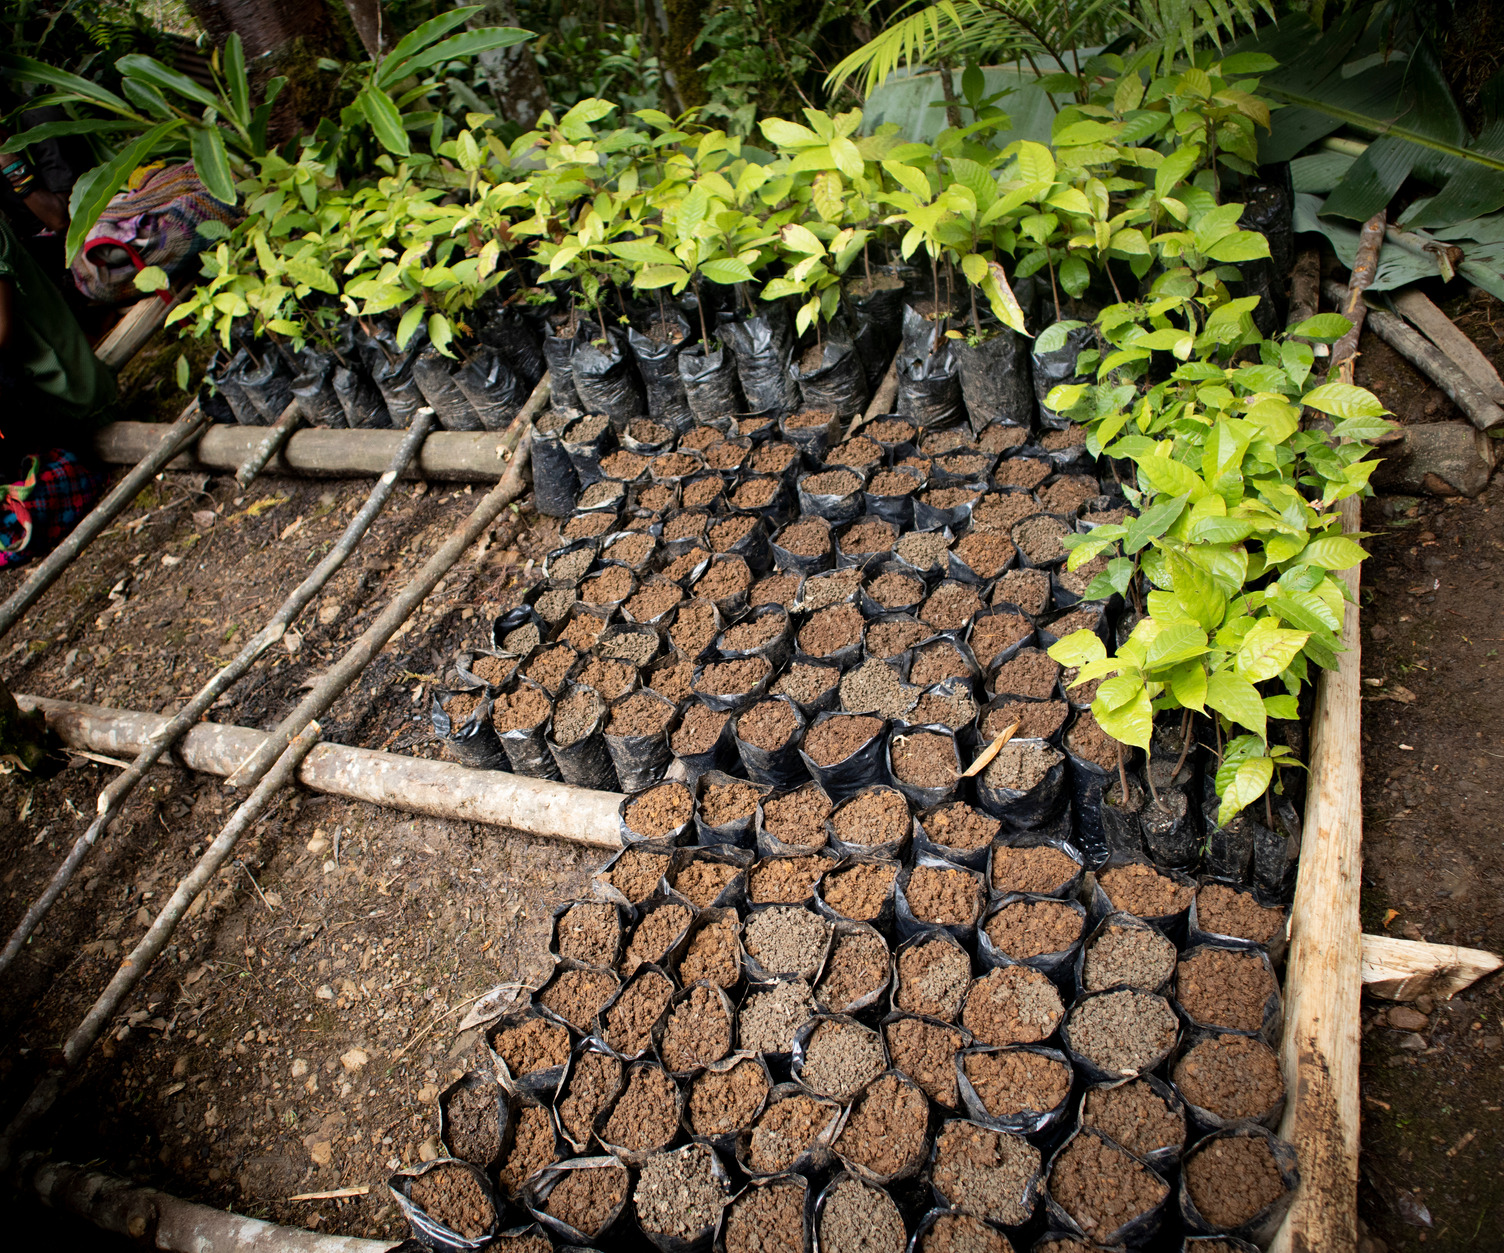 Cocoa seedlings in Mrs Aba Wei garden. To date, she has purchased and distributed nearly 4000 seedlings to communities across 3 districts in Chimbu Province.